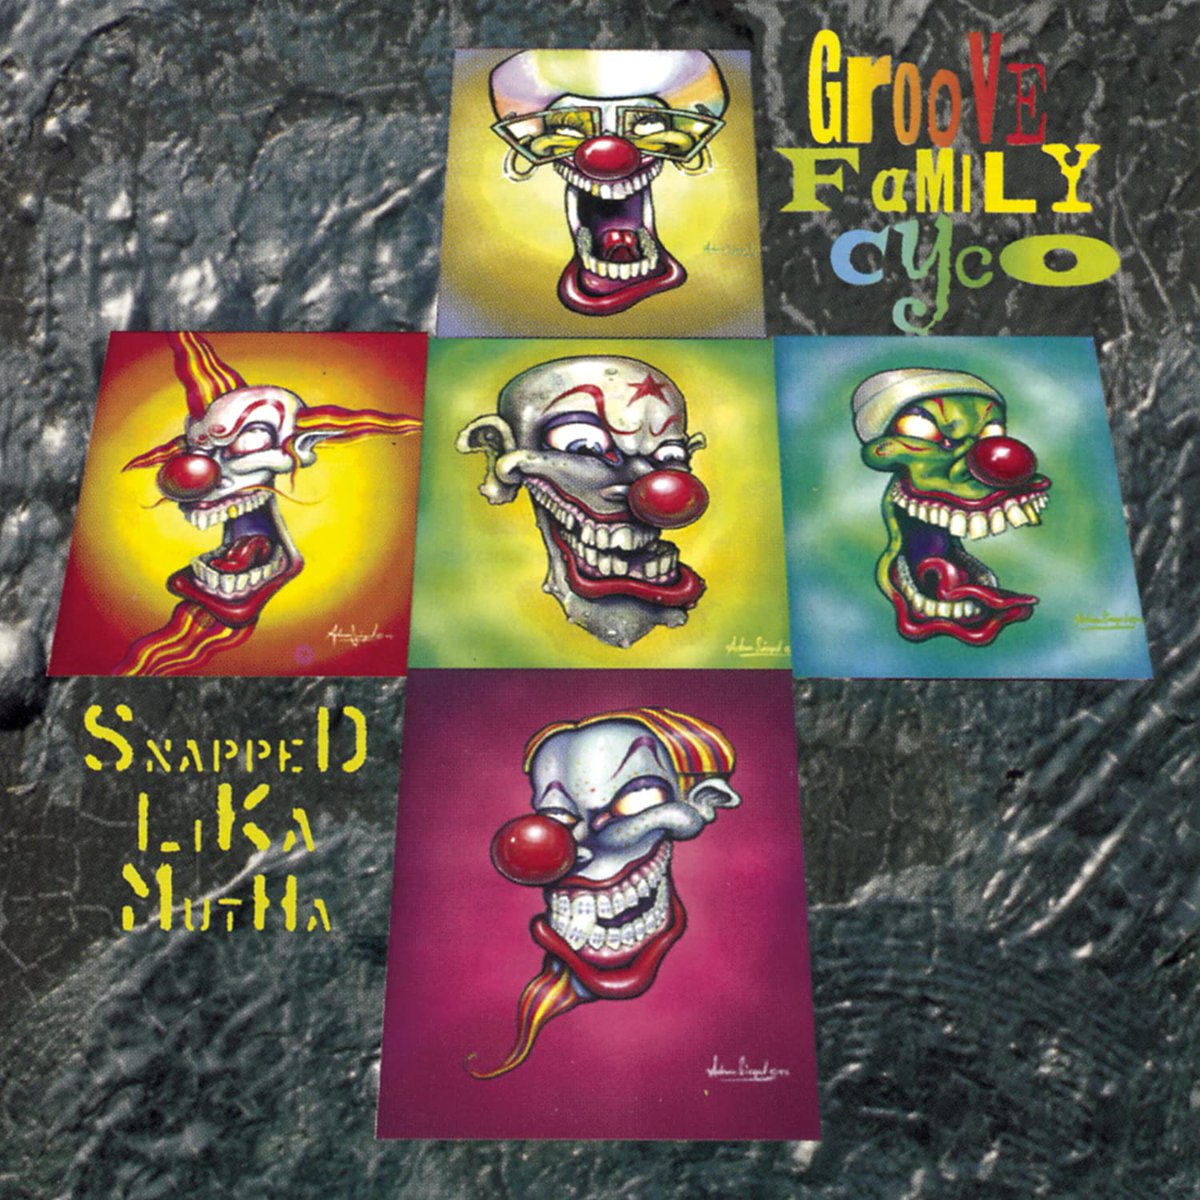 #NowPlaying Groove Family Cyco by Infectious Grooves #RecordOfTheDay #ROTD #AlbumOfTheDay #AOTD #1496 #InfectiousGrooves #Supergroup #MikeMuir #RobertTrujillo #DeanPleasants #AdamSiegel #BrookWackerman #FunkMetal #USA 🇺🇸
@infectiousgrooves